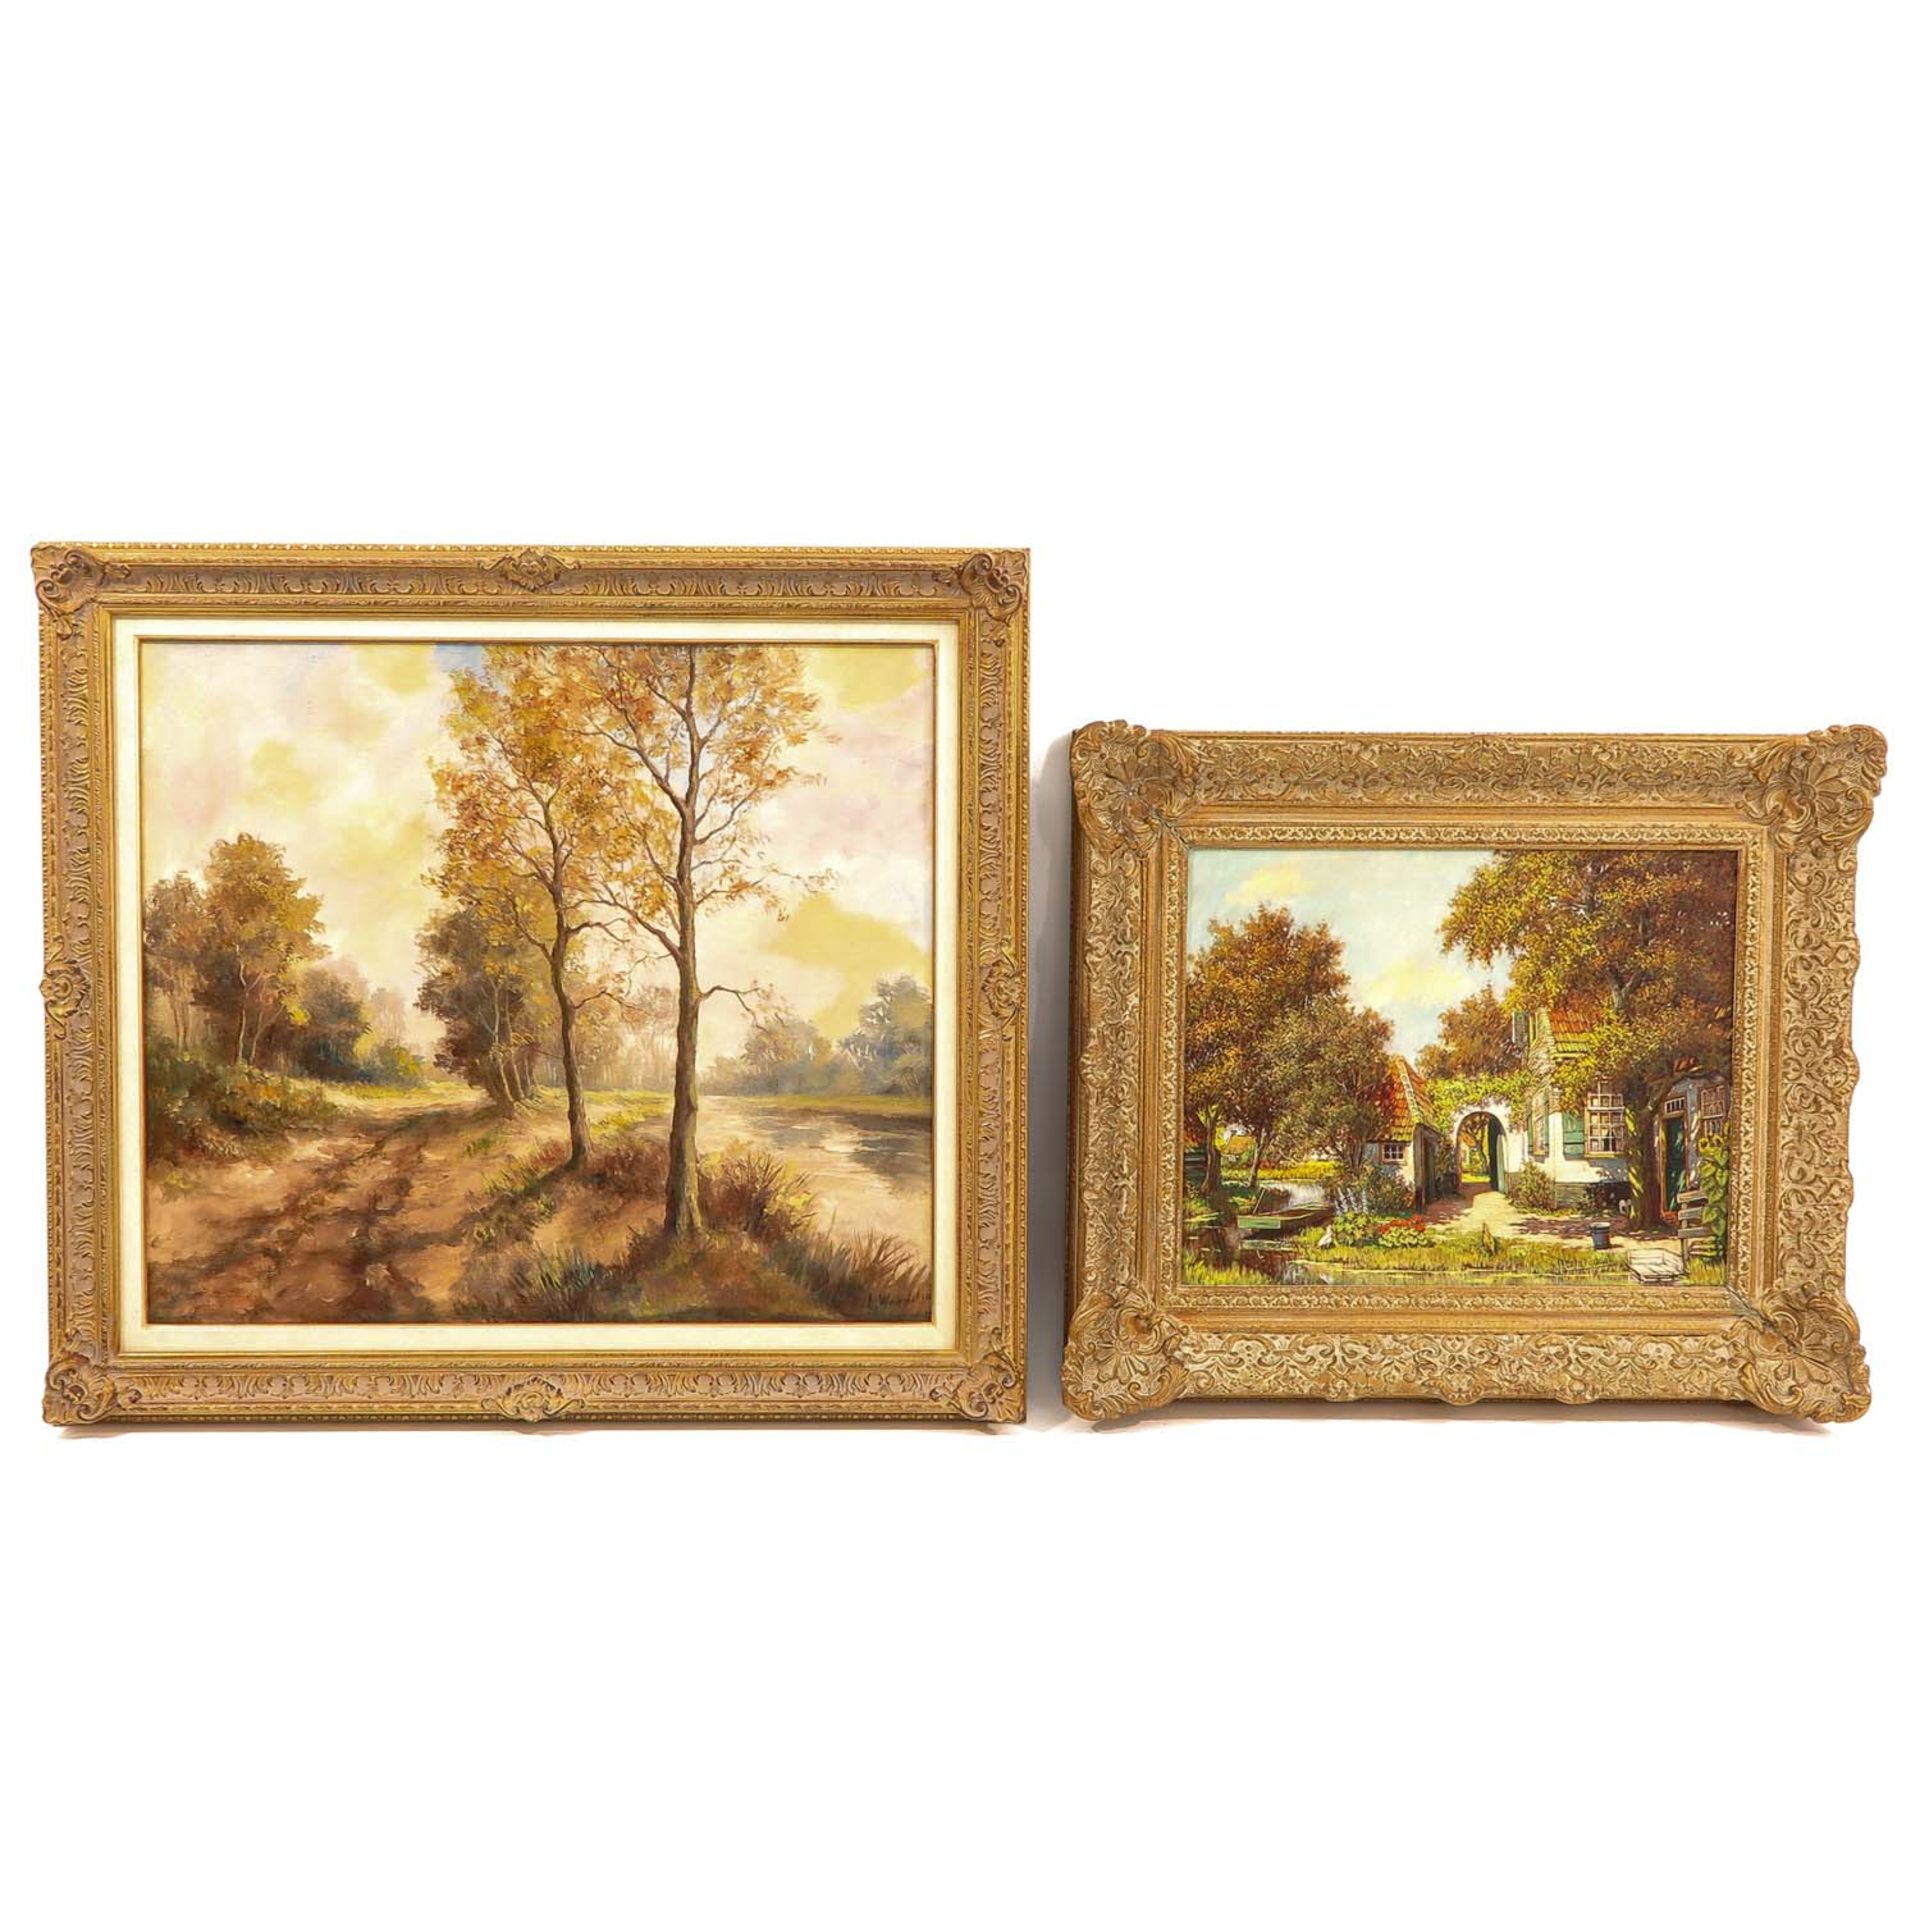 A Lot of 2 Oil on Canvas Paintings